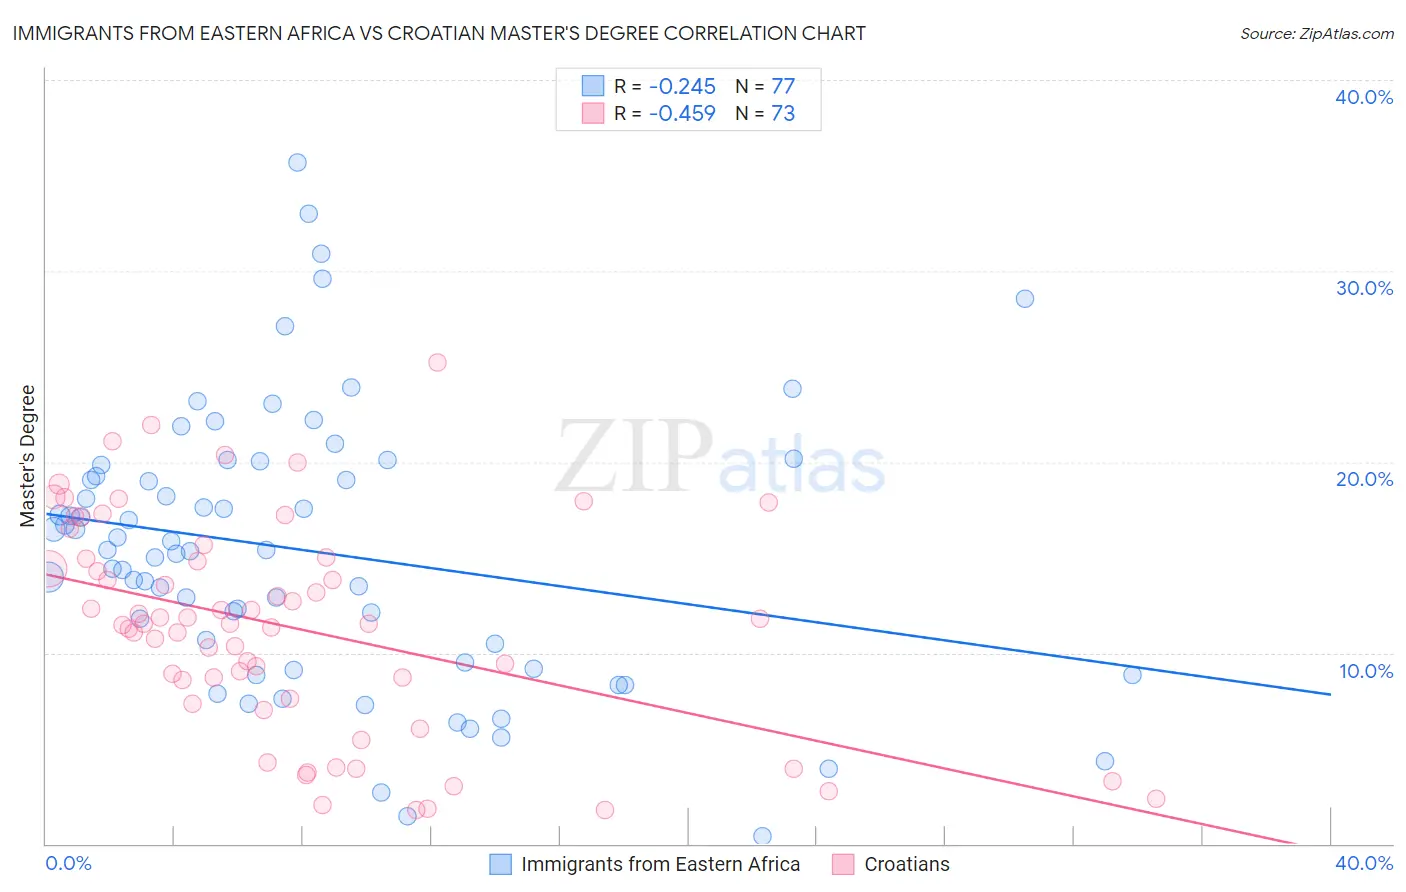 Immigrants from Eastern Africa vs Croatian Master's Degree